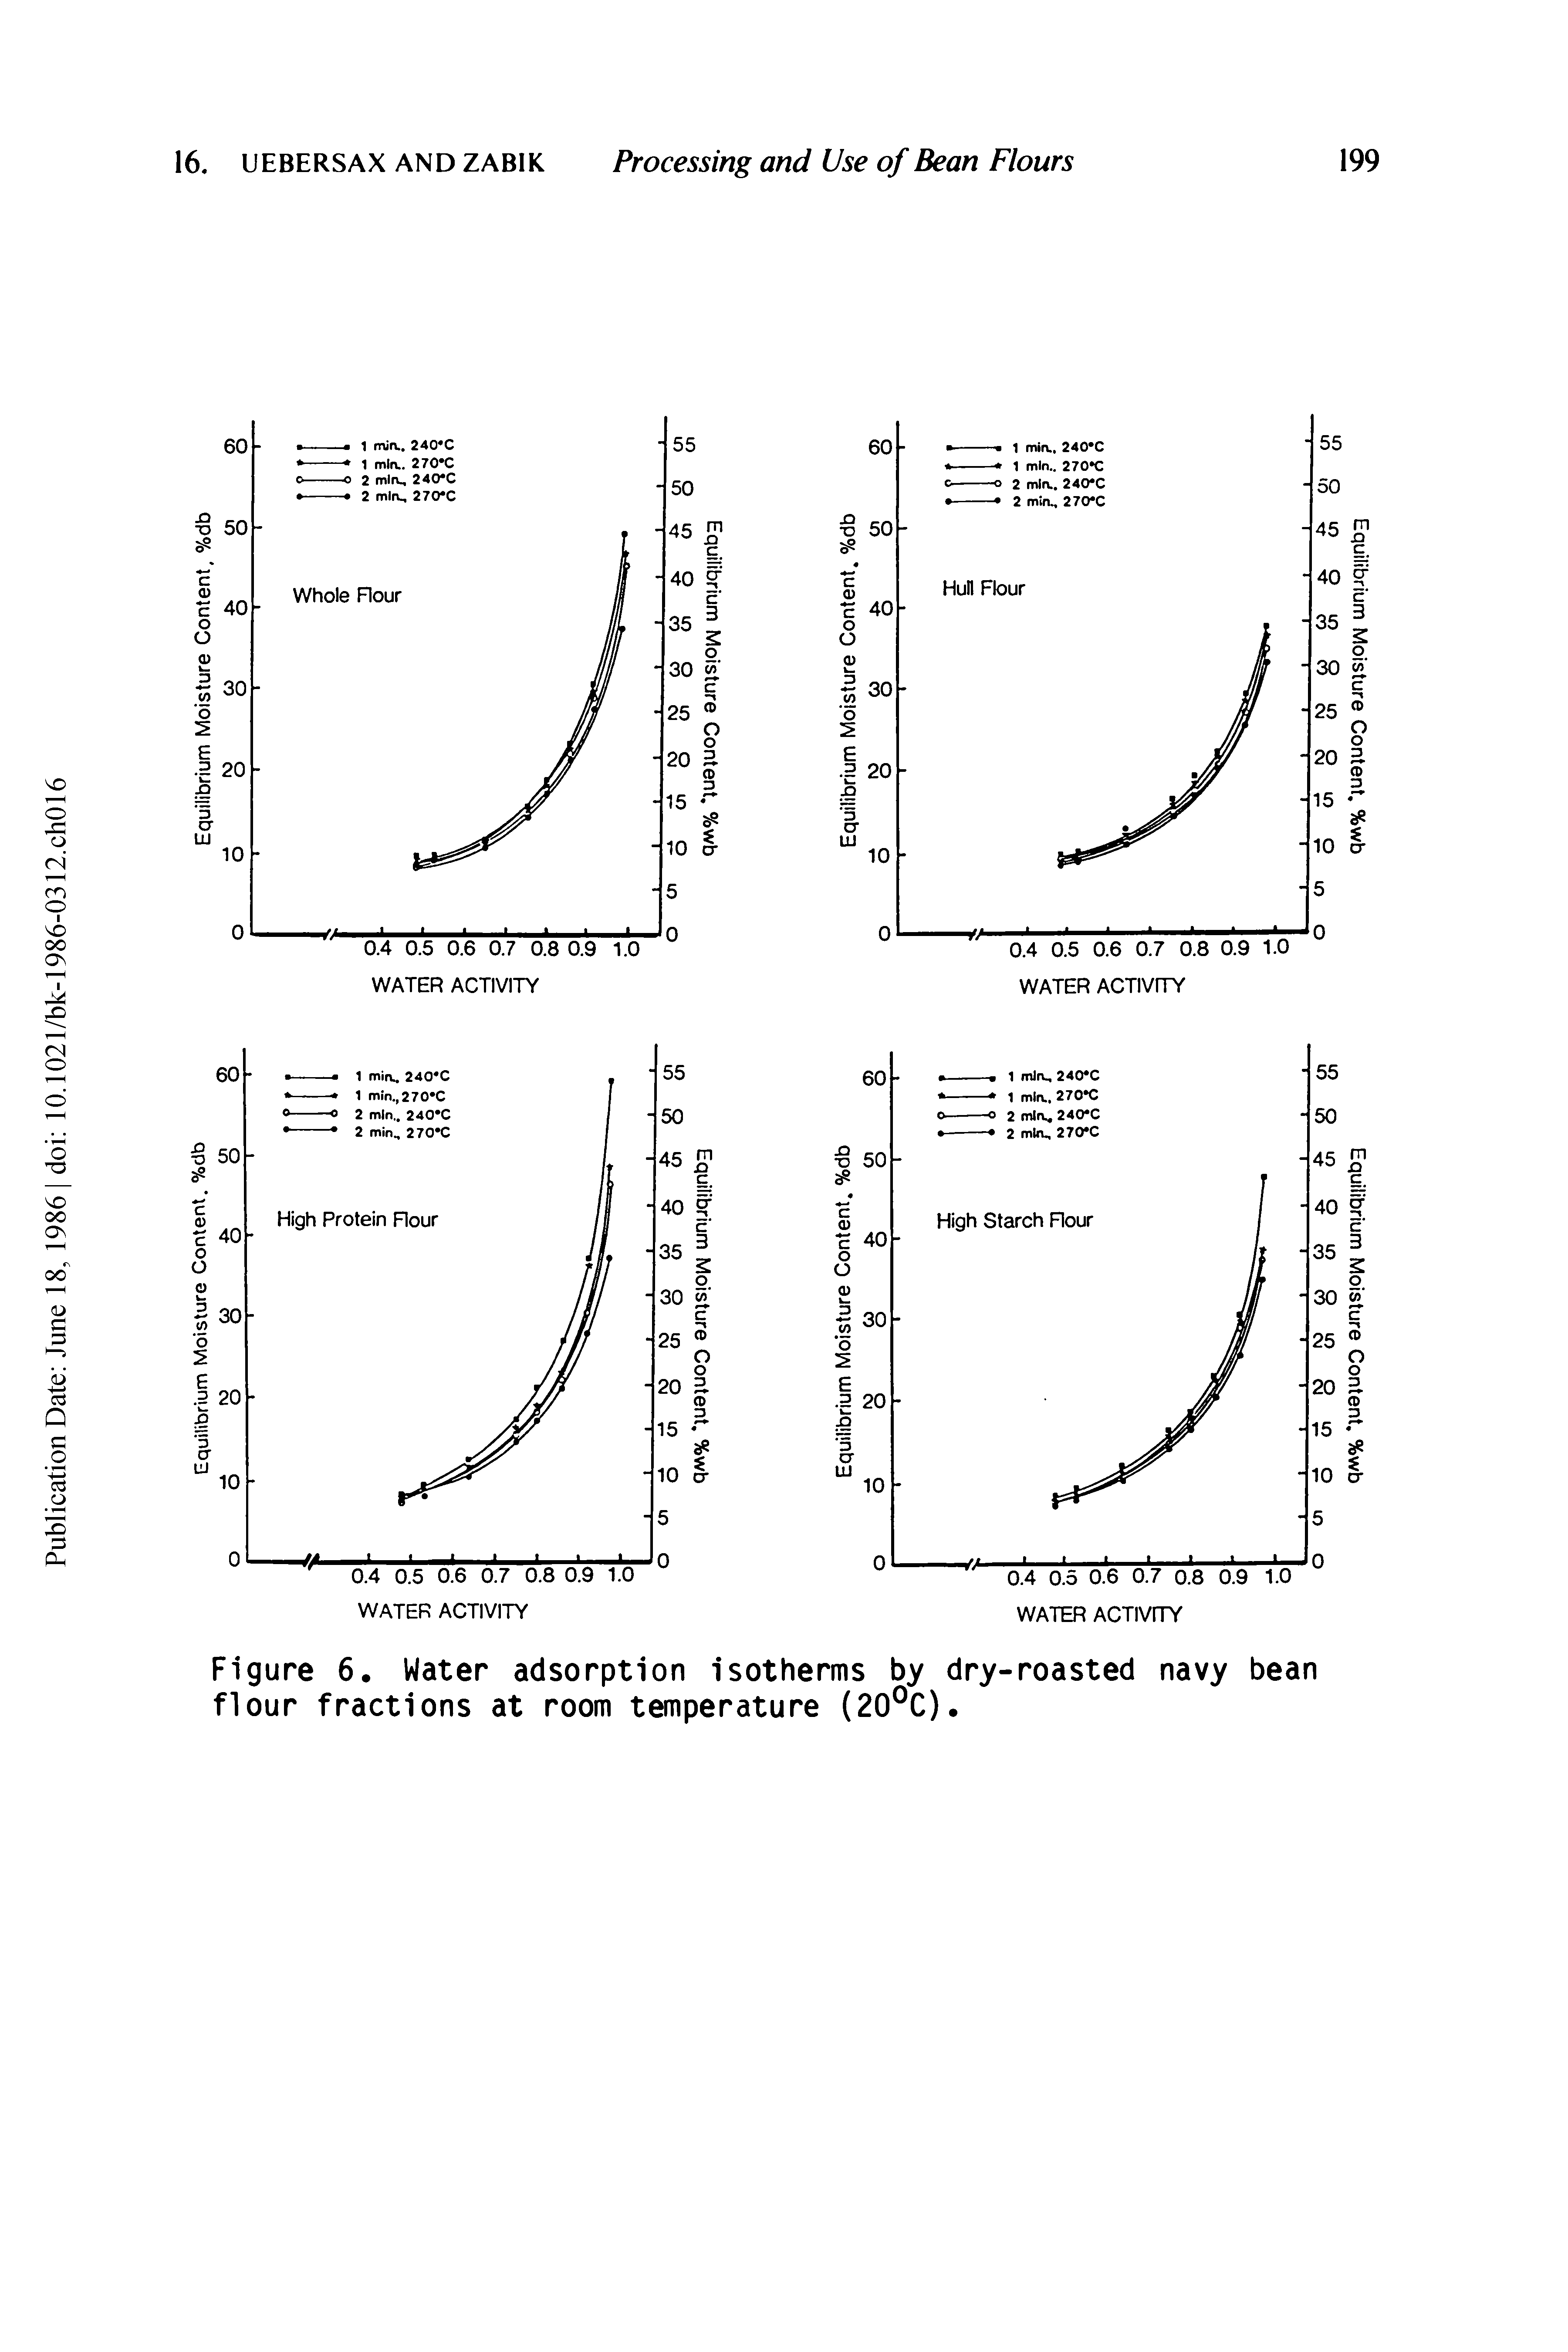 Figure 6 Water adsorption isotherms by dry-roasted navy bean flour fractions at room temperature (20°C).